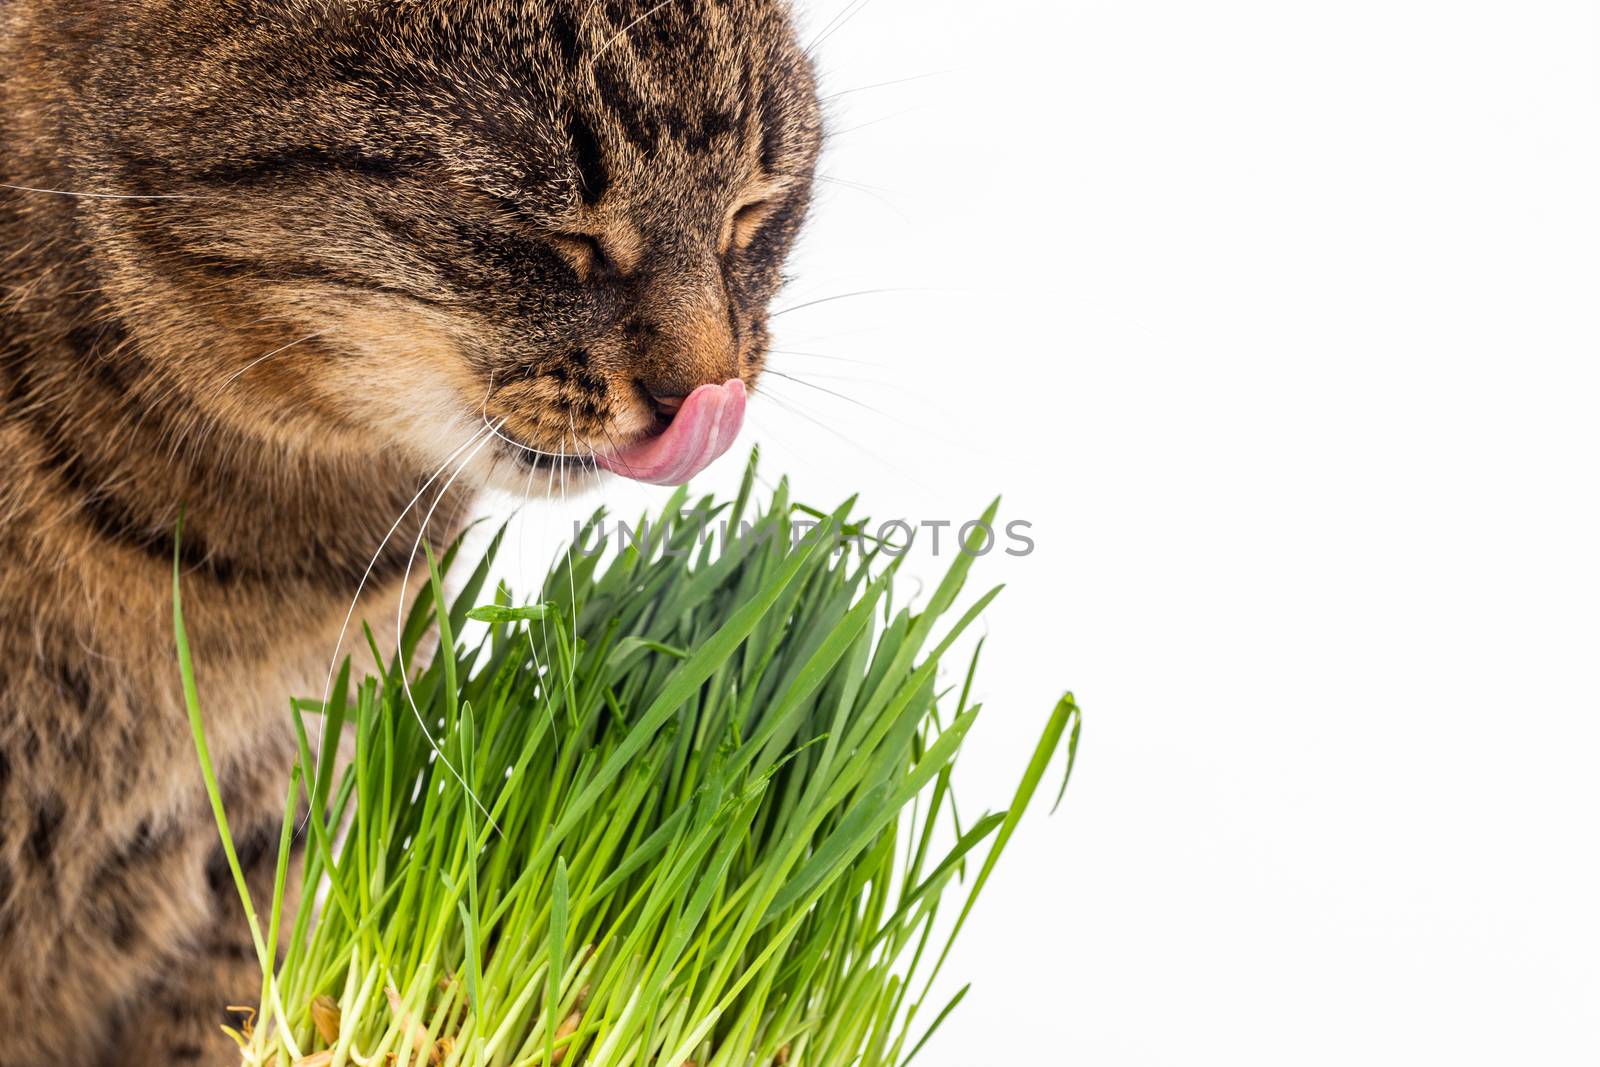 gray domestic tabby cat eating fresh green grass close-up on white background with selective focus and blur. Licking its nose with pink tongue, eyes closed.